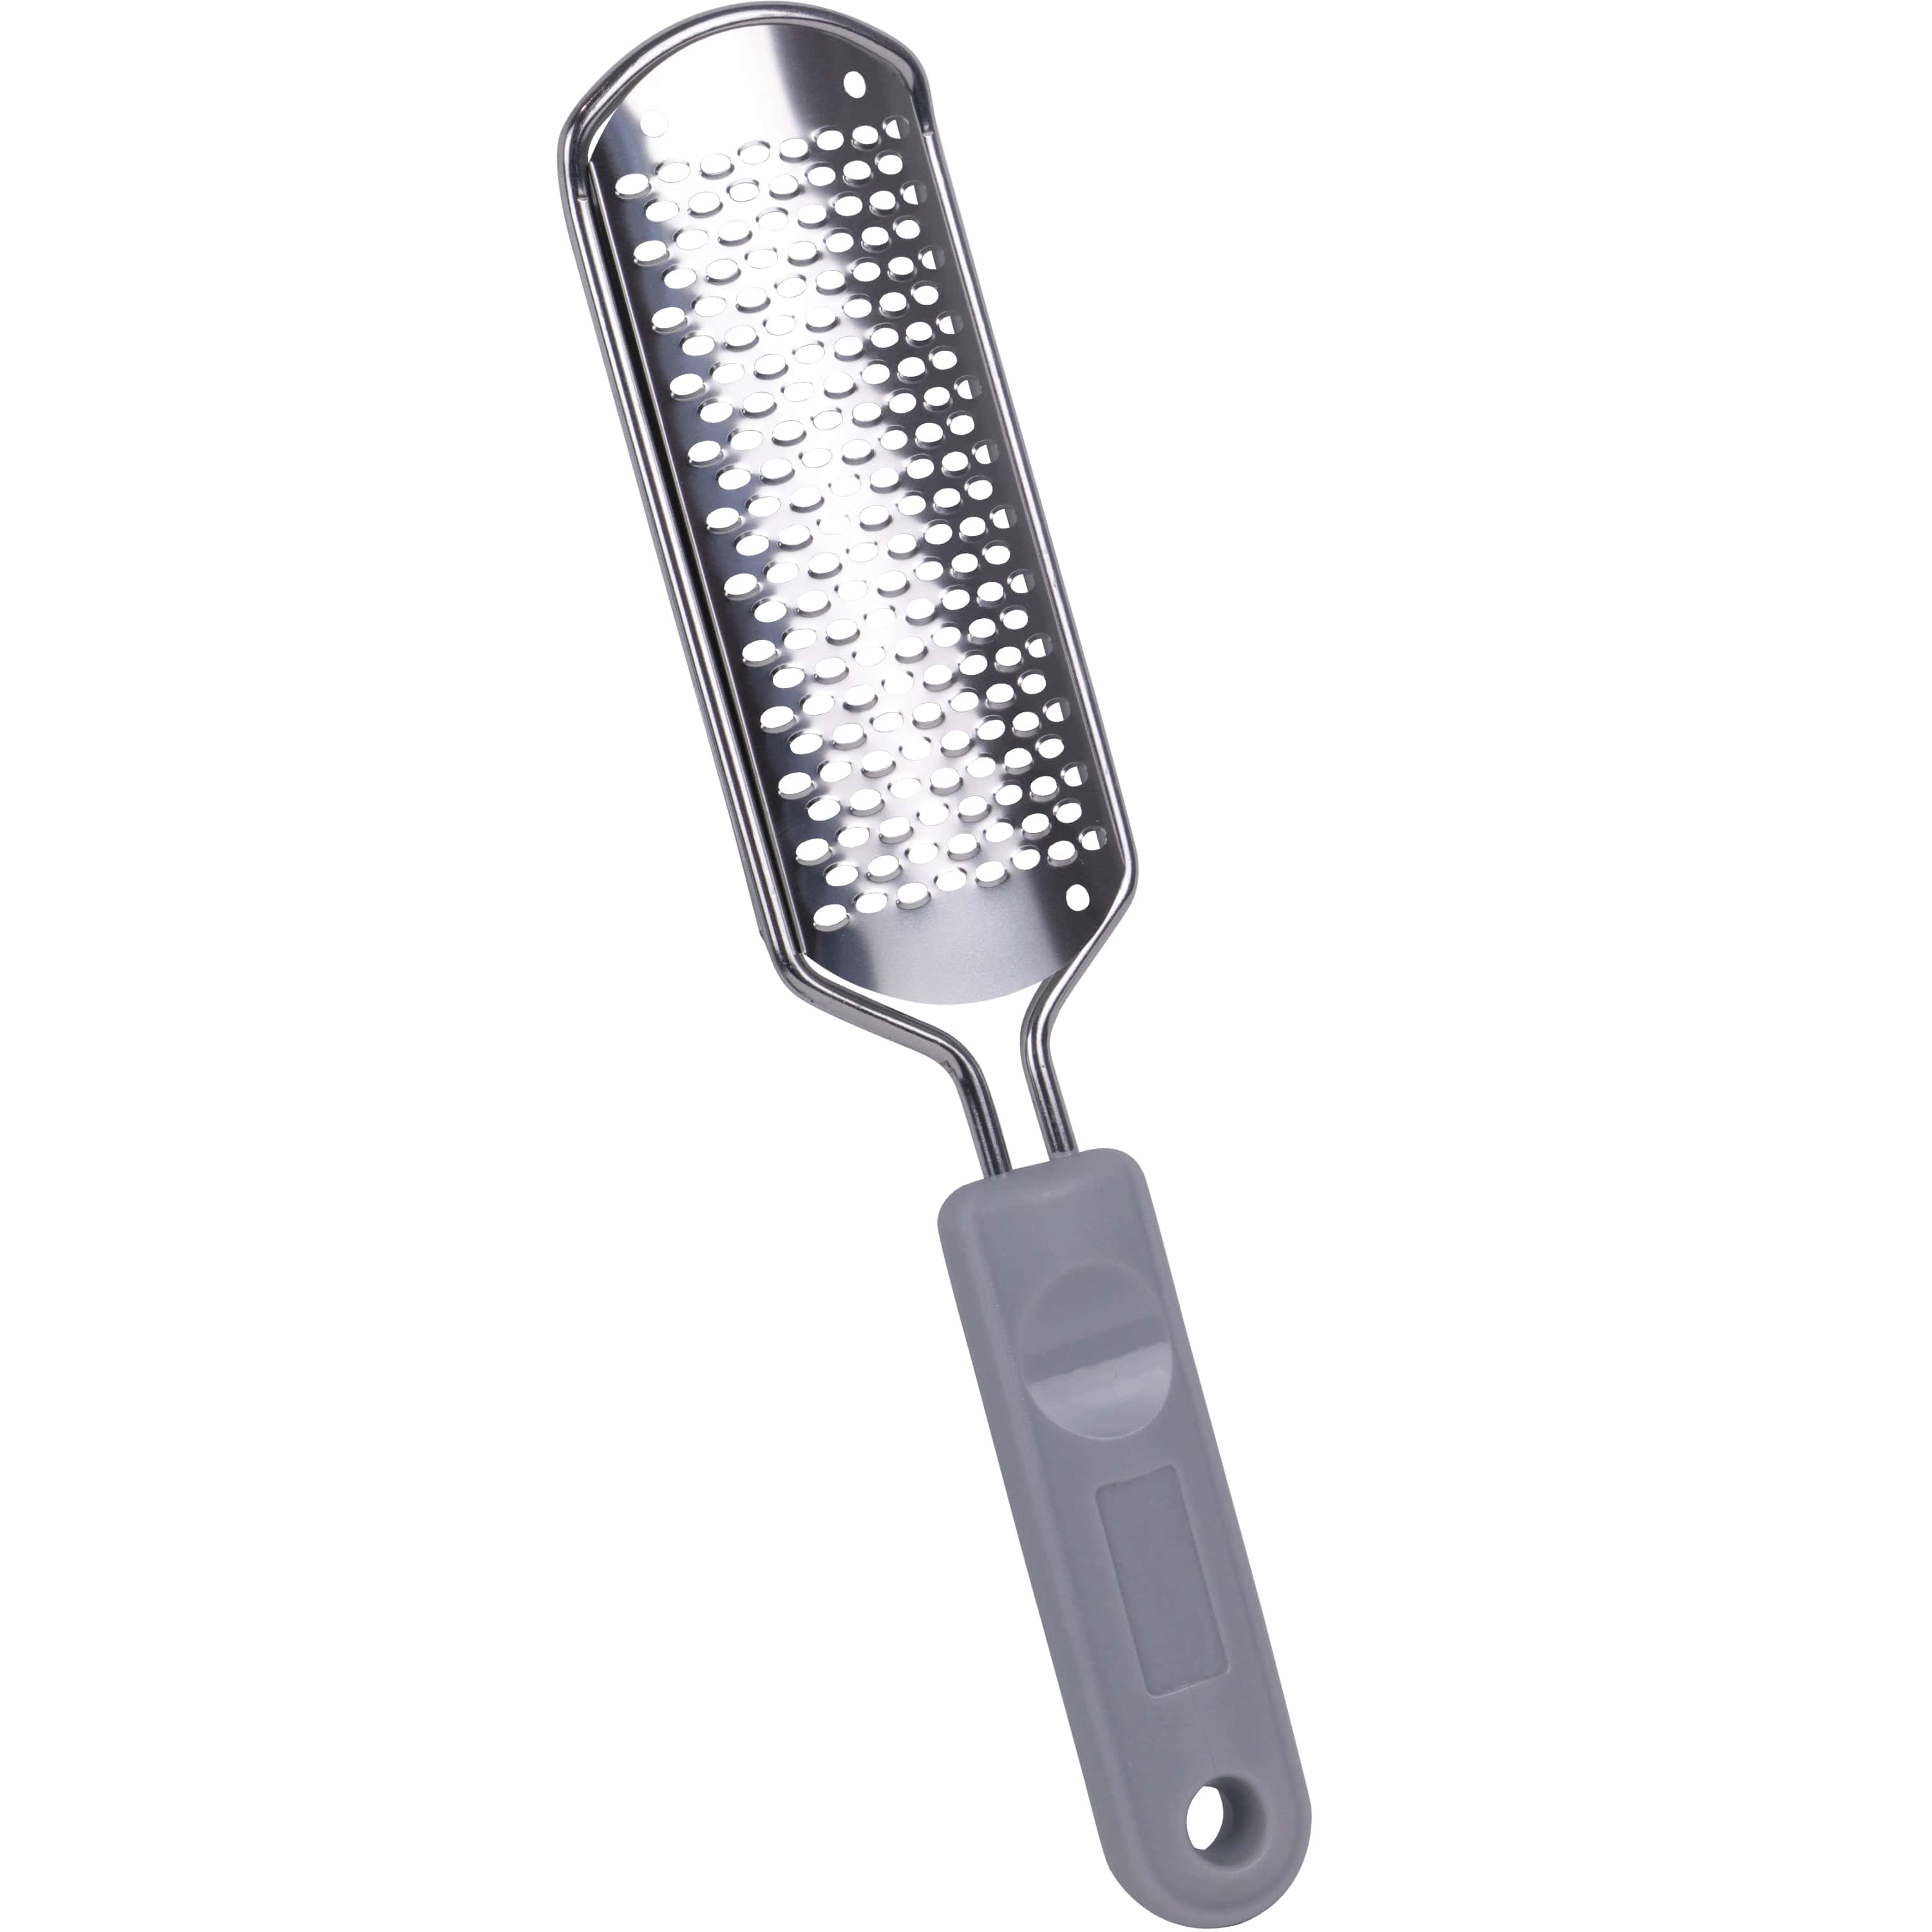 Pedicure Foot File Callus Remover - Large Stainless Steel Foot